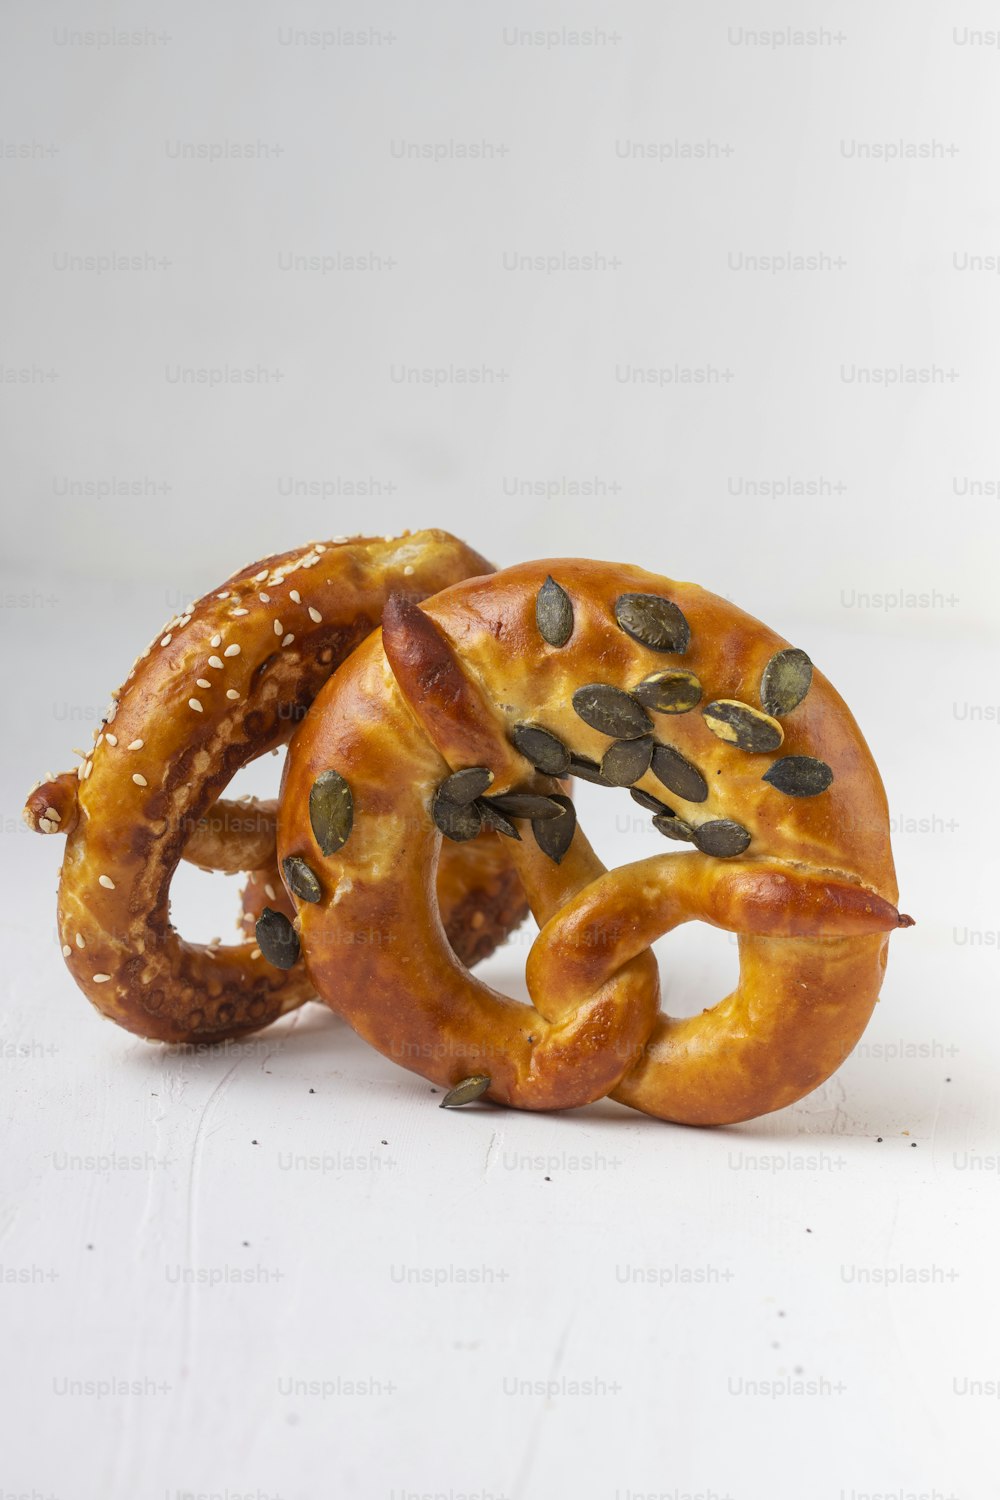 a couple of pretzels with seeds on them